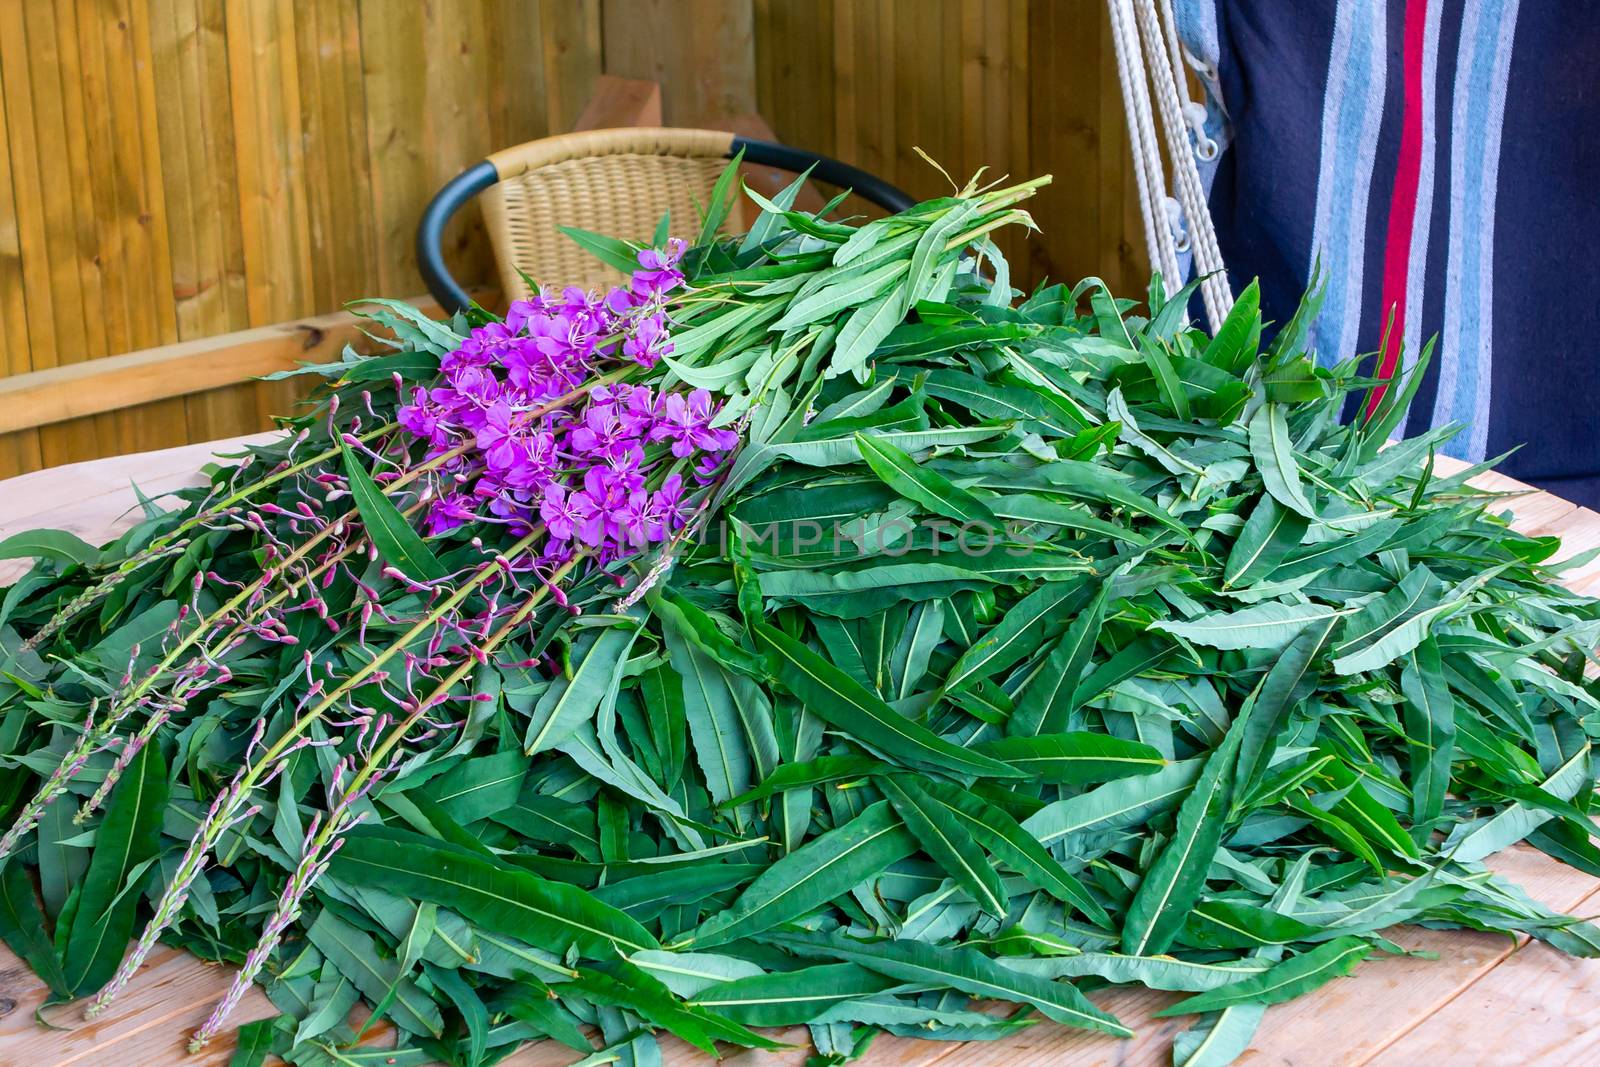 blooming sally leaves and flowers - raw materials for making traditional Russian Koporsky tea also known as Ivan Tea by galsand